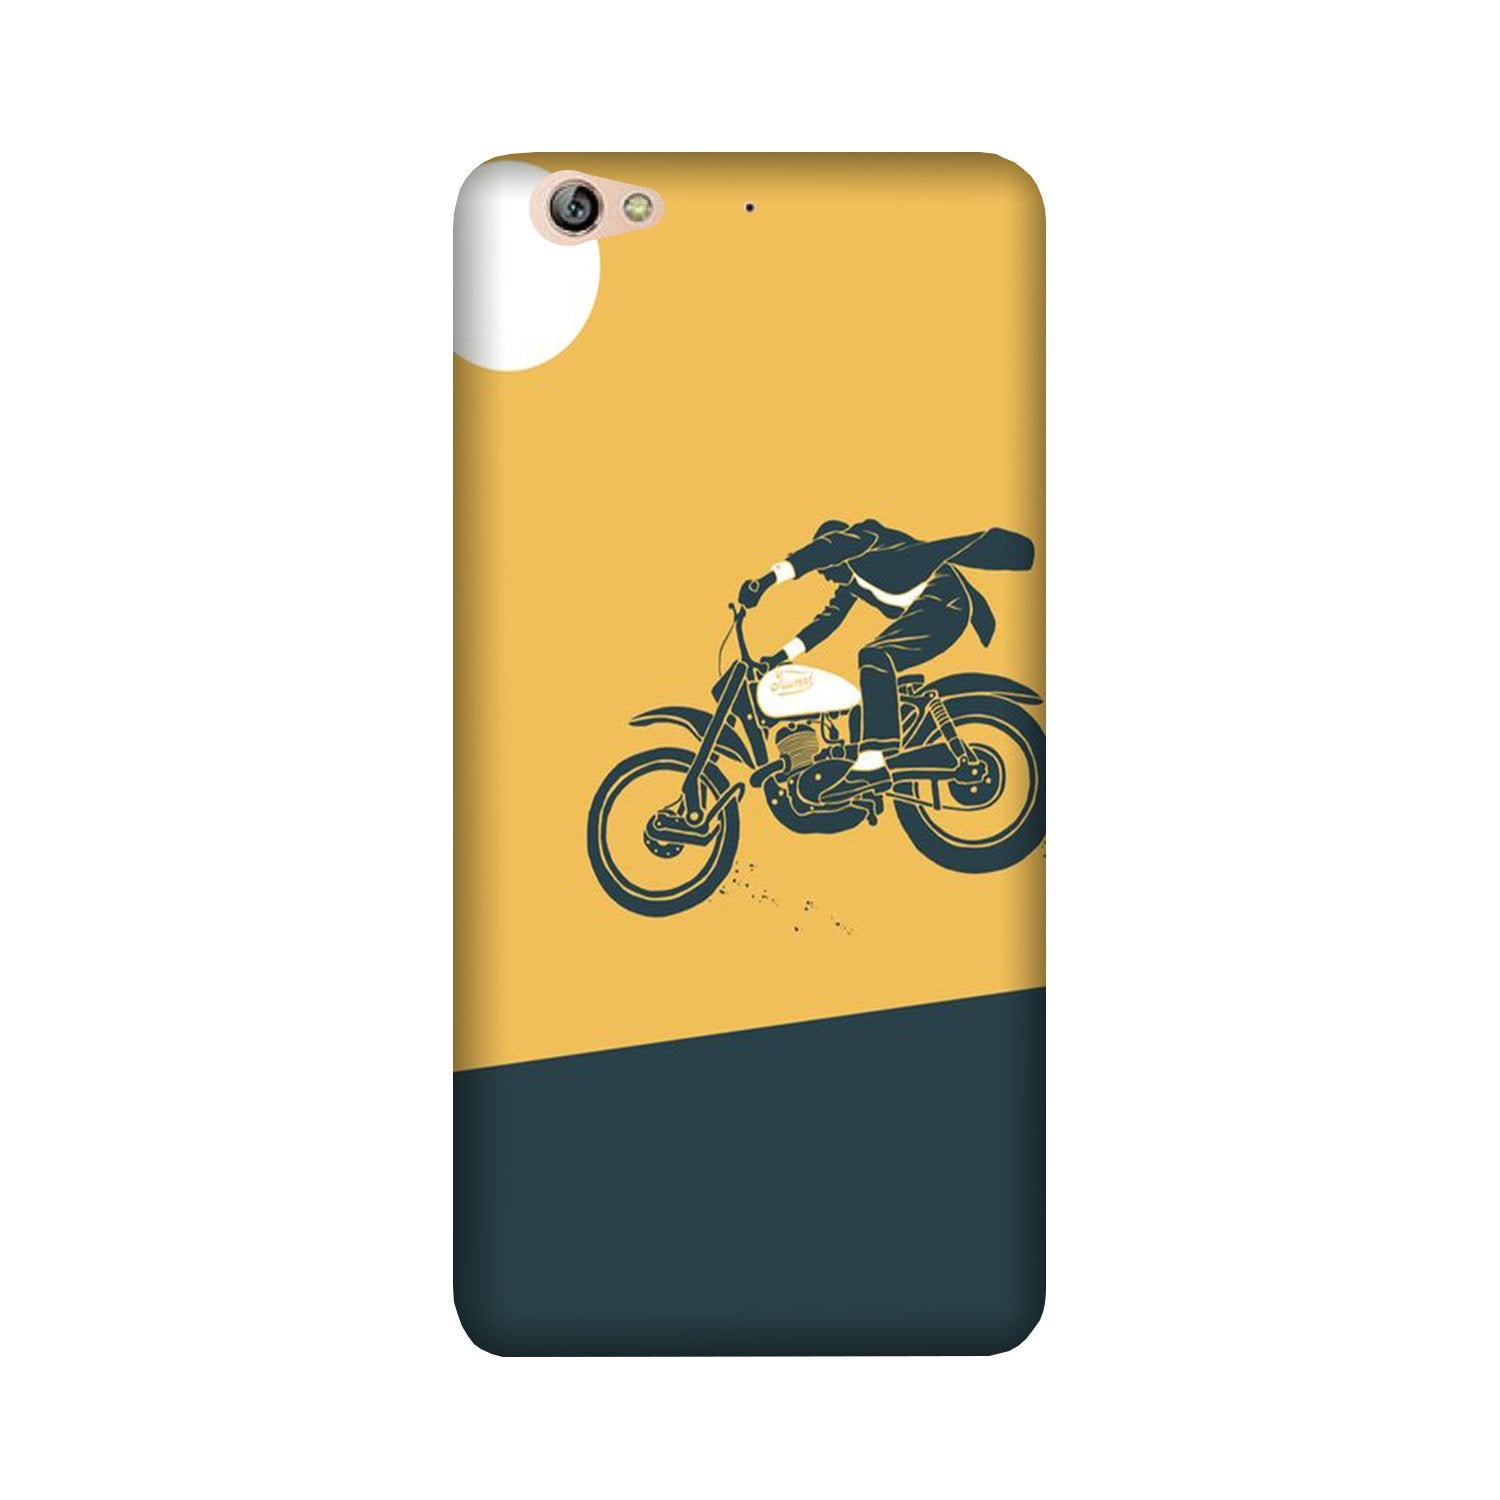 Bike Lovers Case for Gionee S6 (Design No. 256)